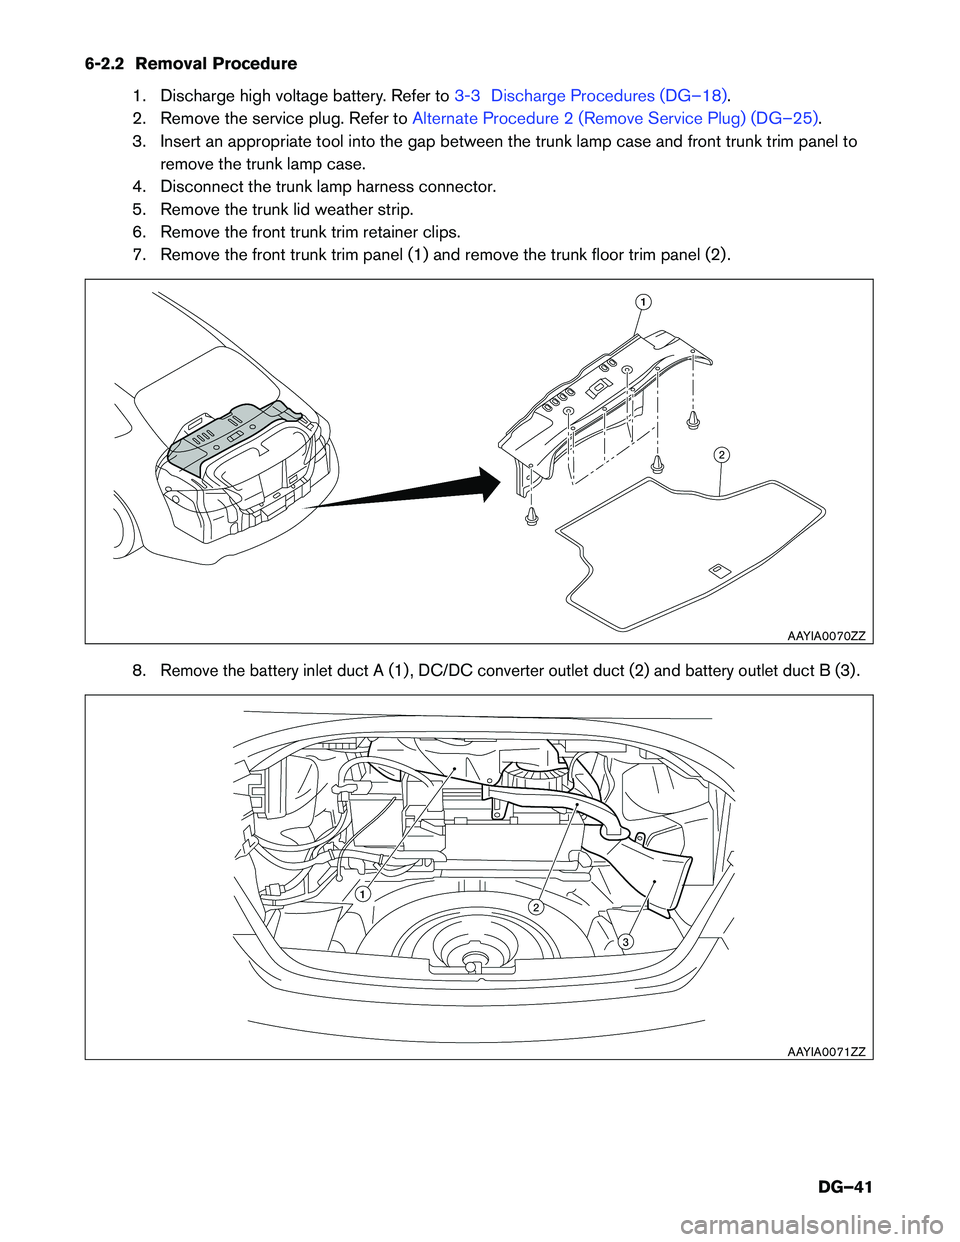 INFINITI Q70 HYBRID 2018  Dismantling Guide 6-2.2 Removal Procedure1. Discharge high voltage battery. Refer to
3-3 Discharge Procedures (DG–18).
2. Remove the service plug. Refer to
Alternate Procedure 2 (Remove Service Plug) (DG–25).
3. In